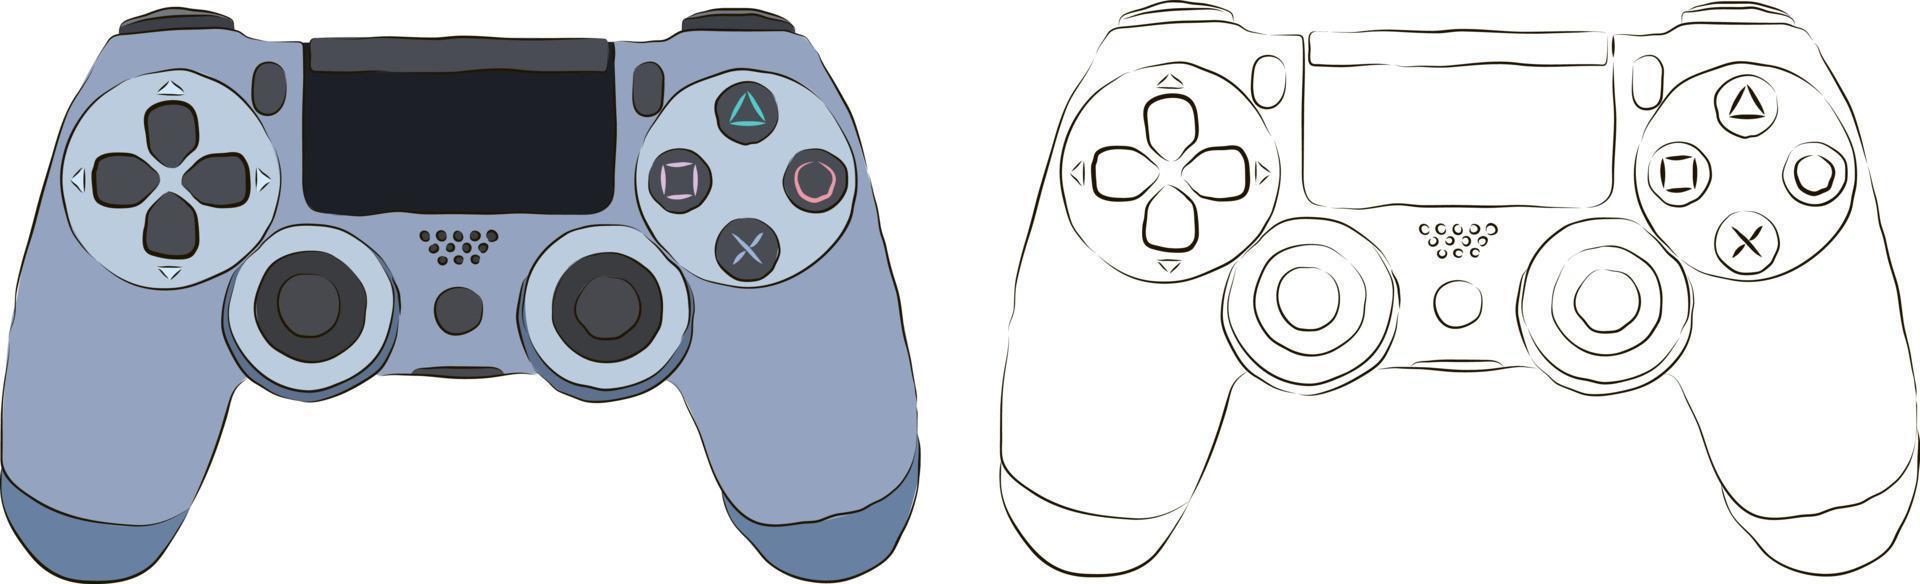 Game joystick in color and black and white. The concept of entertainment and recreation in computer games. vector